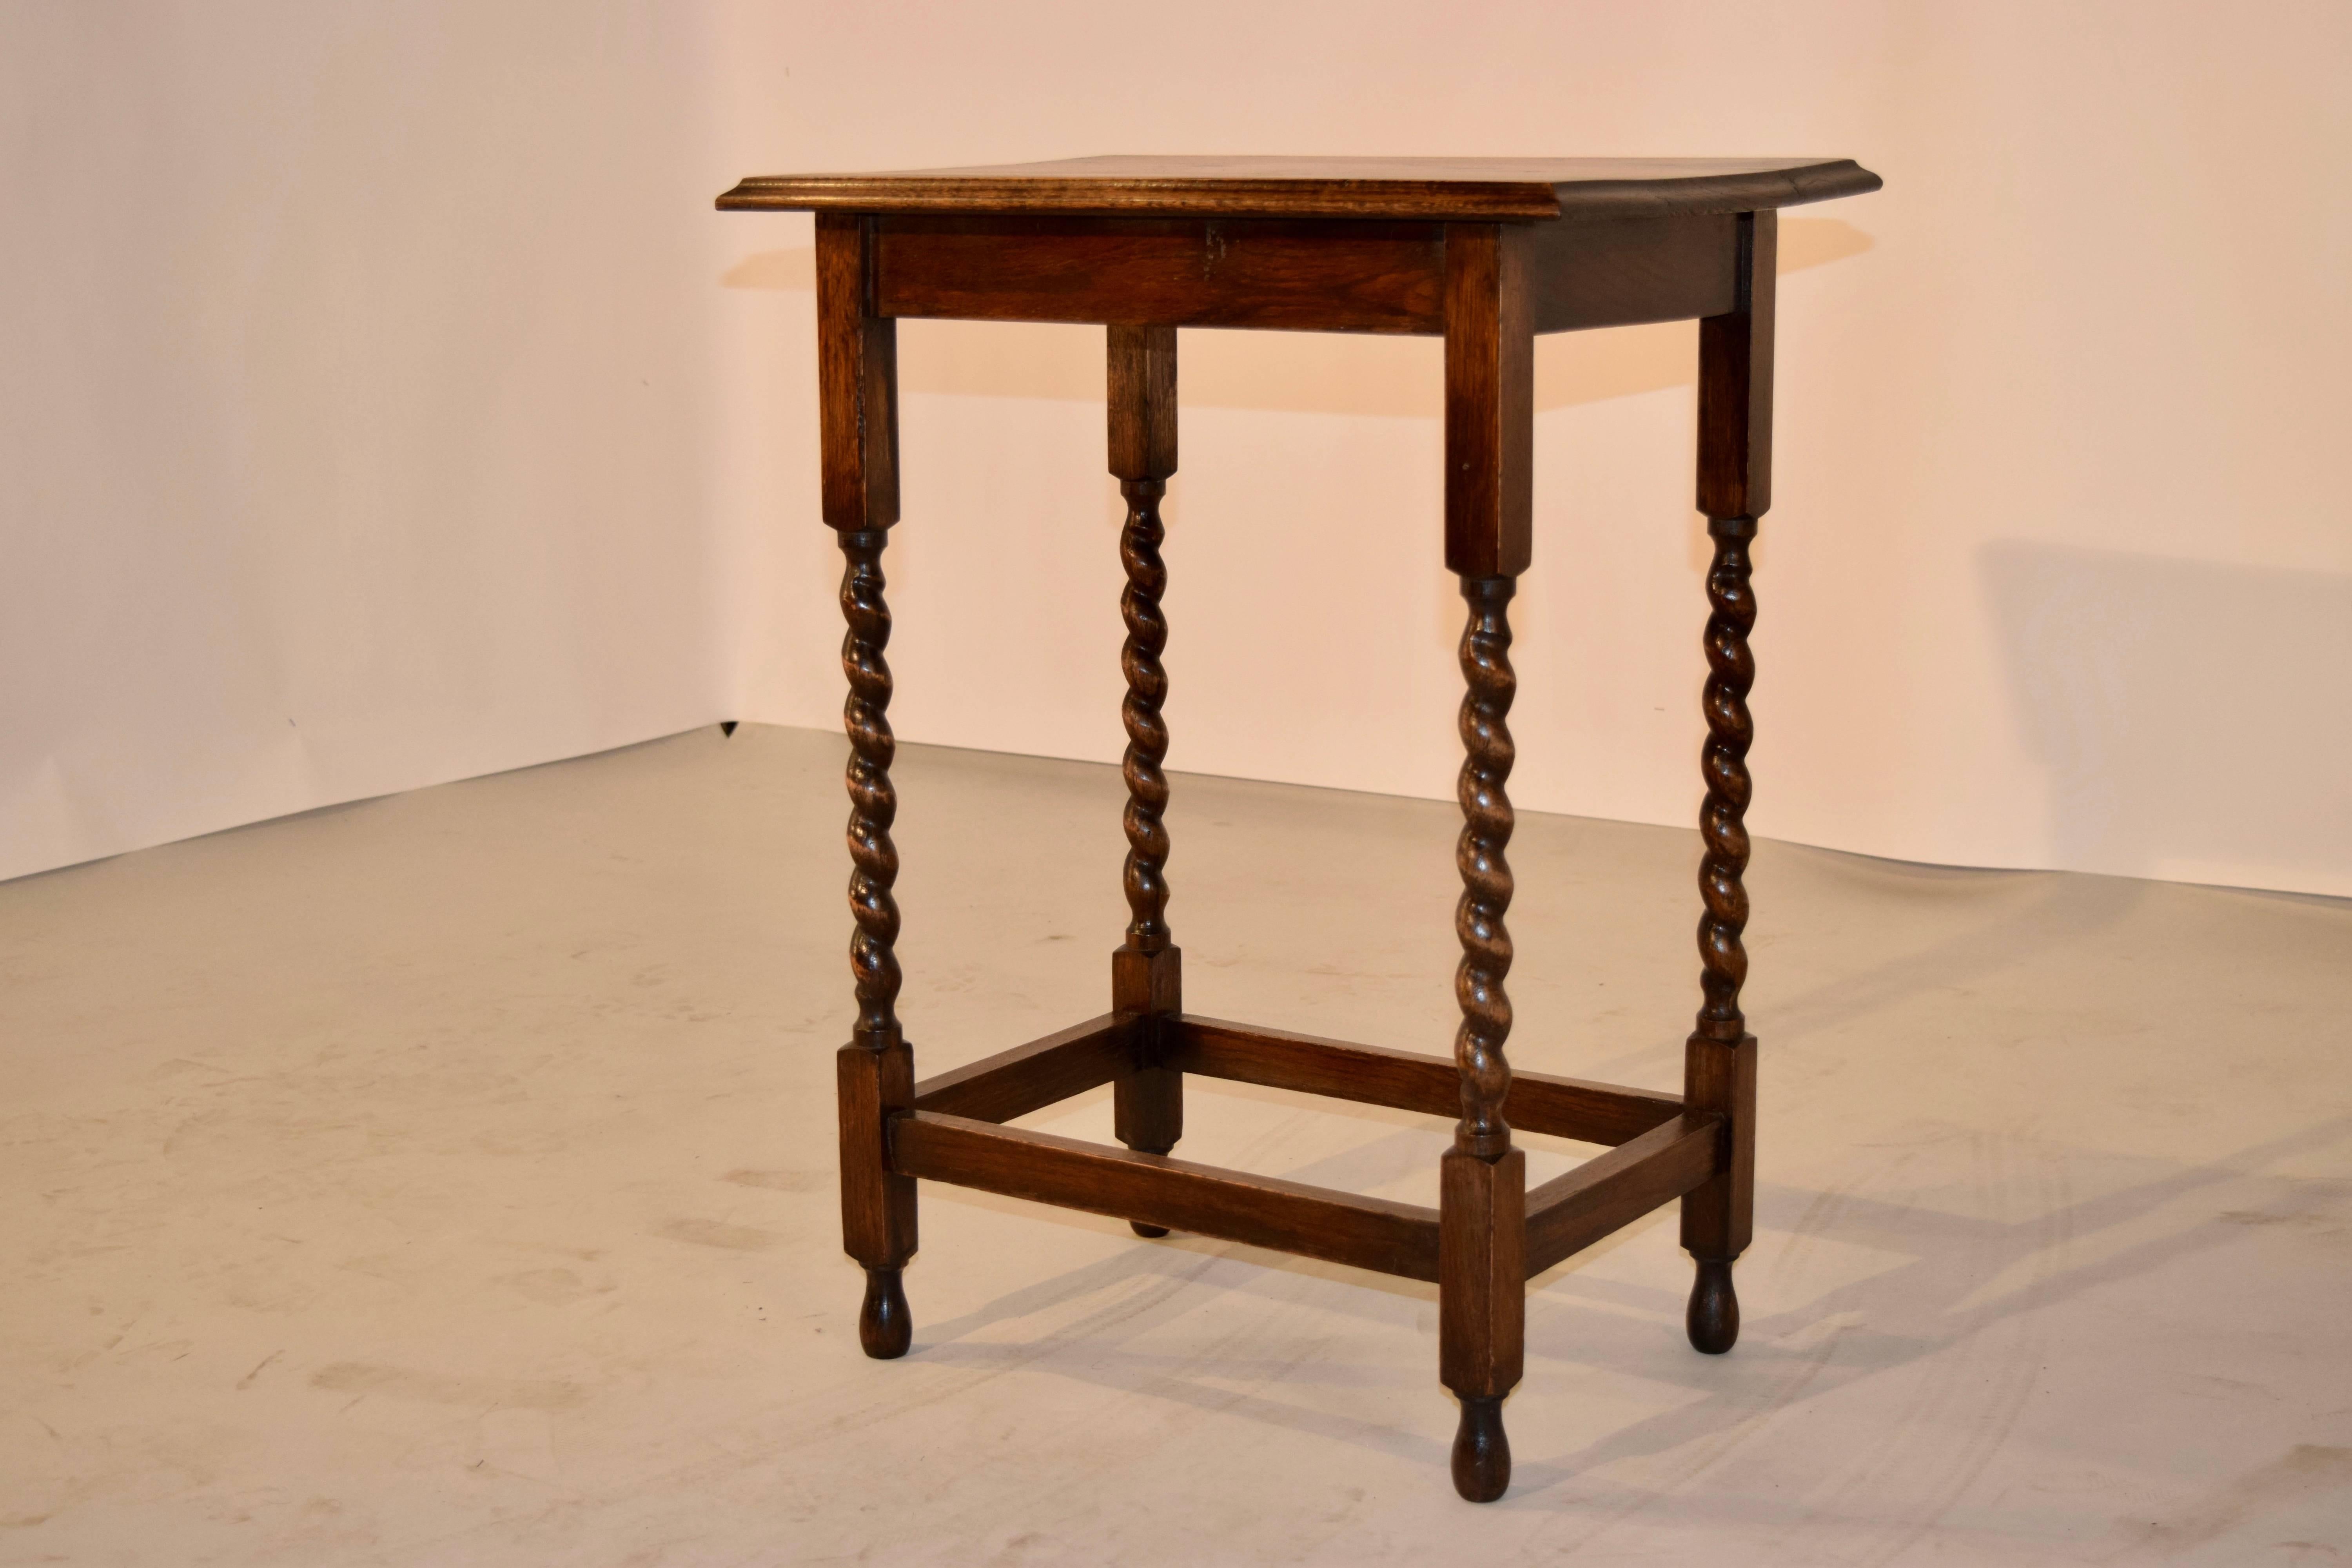 English oak side table with a rectangular shaped top which has a bevelled edge, following down to a simple apron and supported on hand-turned barley twist legs, joined by stretchers. Raised on turned feet.